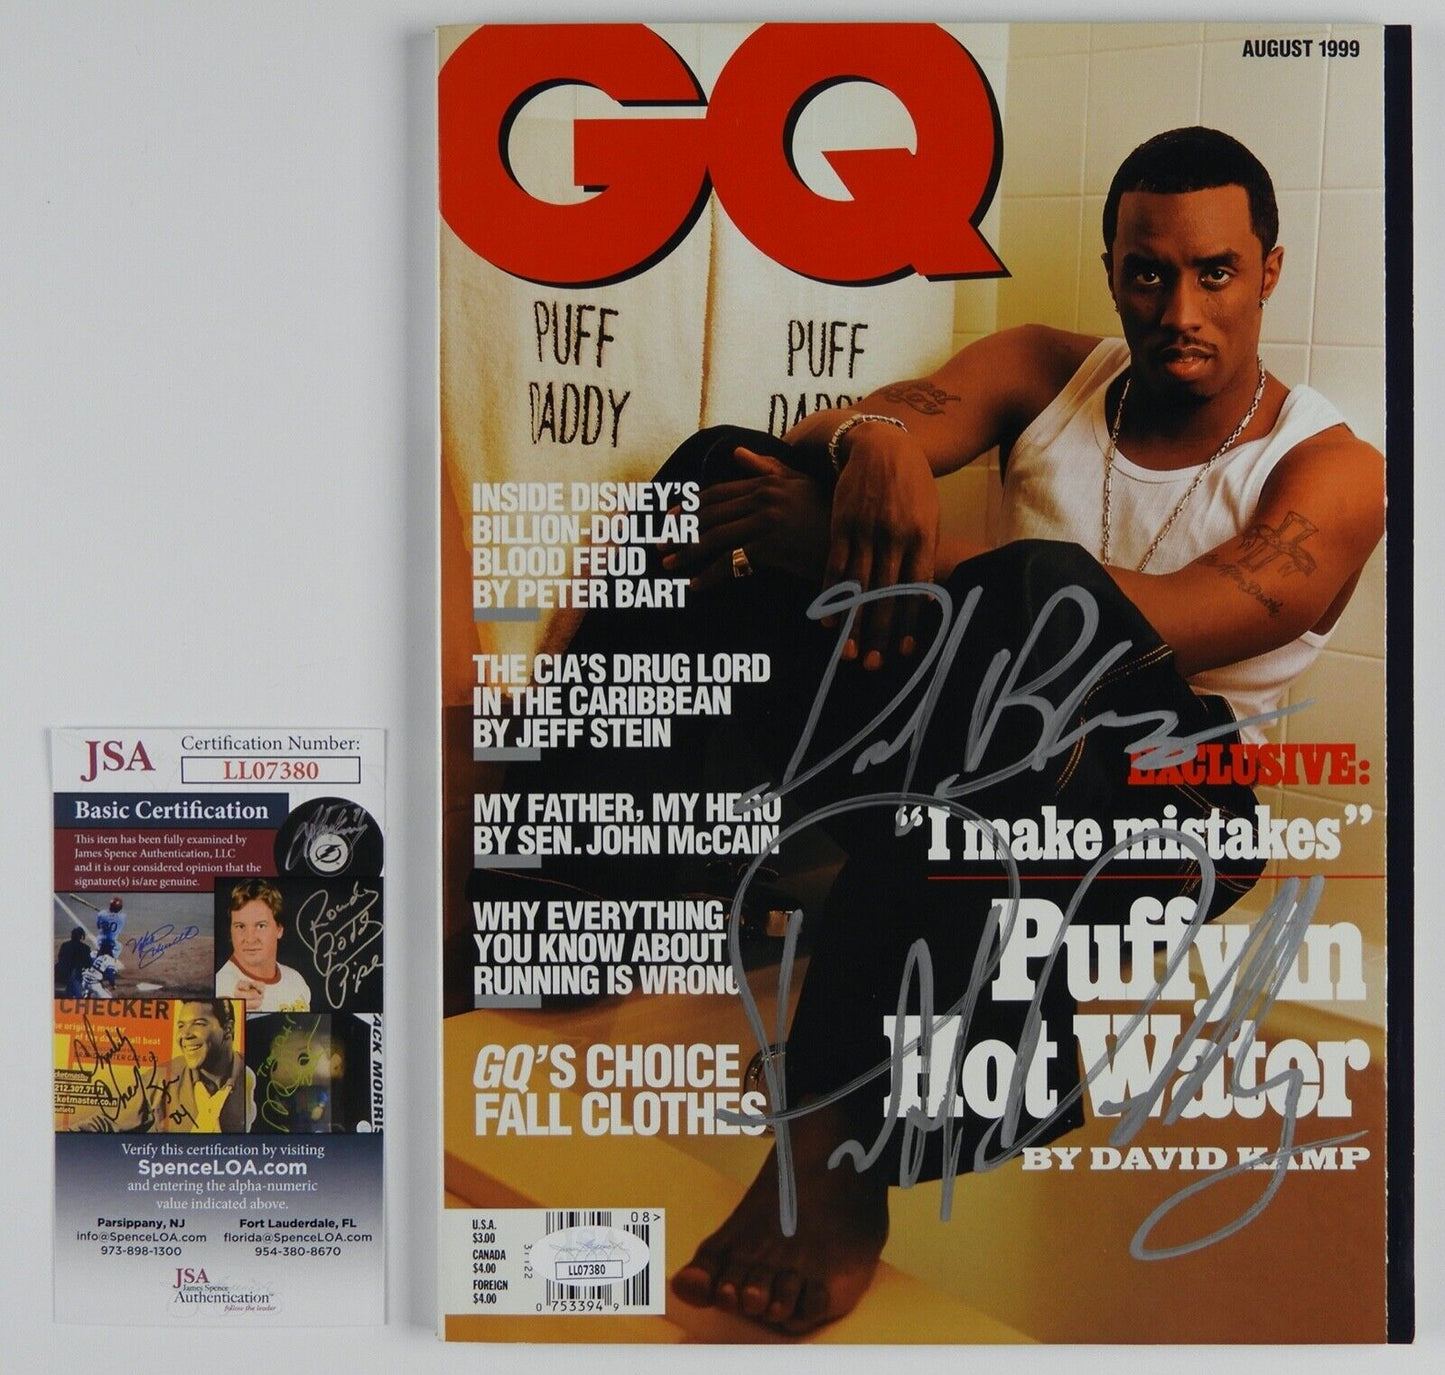 Puffy P Diddy Sean Combs JSA Autograph Signed GQ Magazine